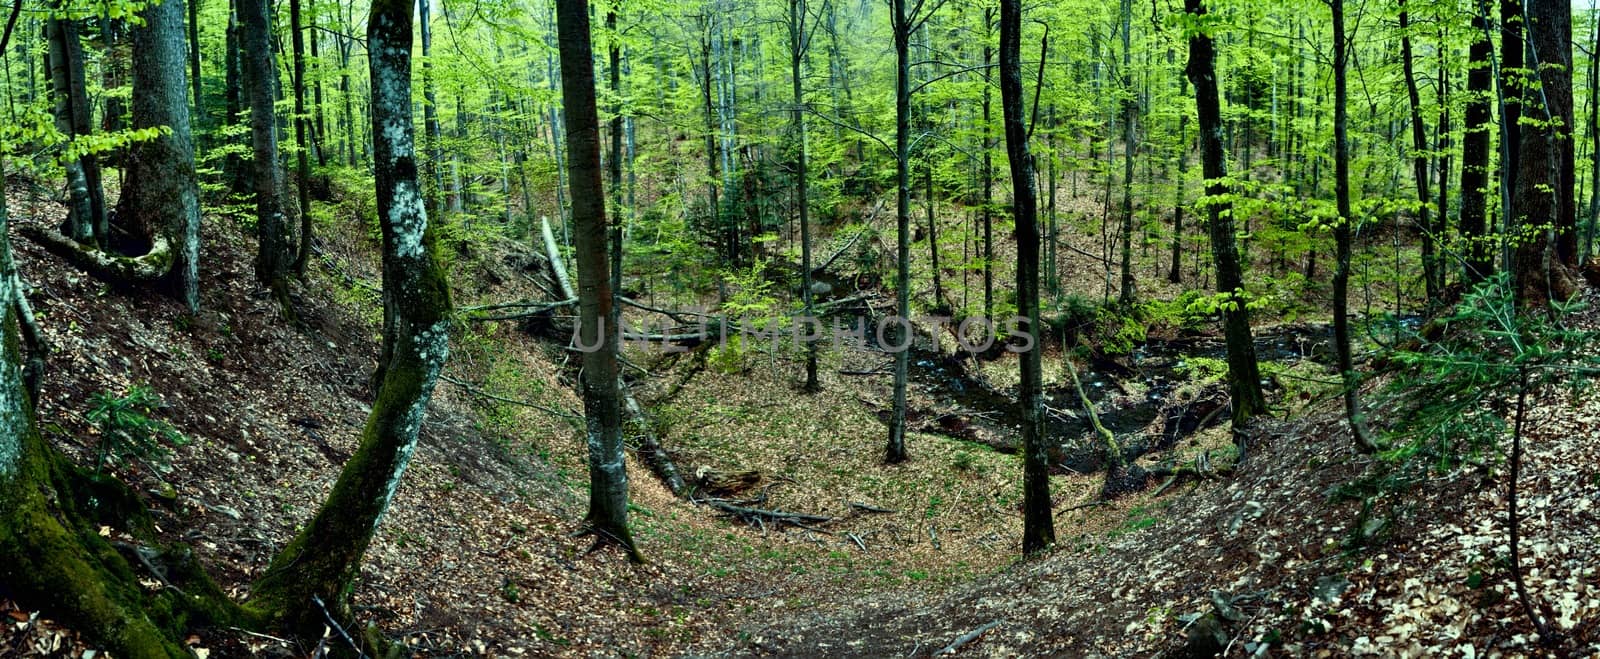 Primeval beech forest on broders between Slovakia and Ukraine in eastern Europe